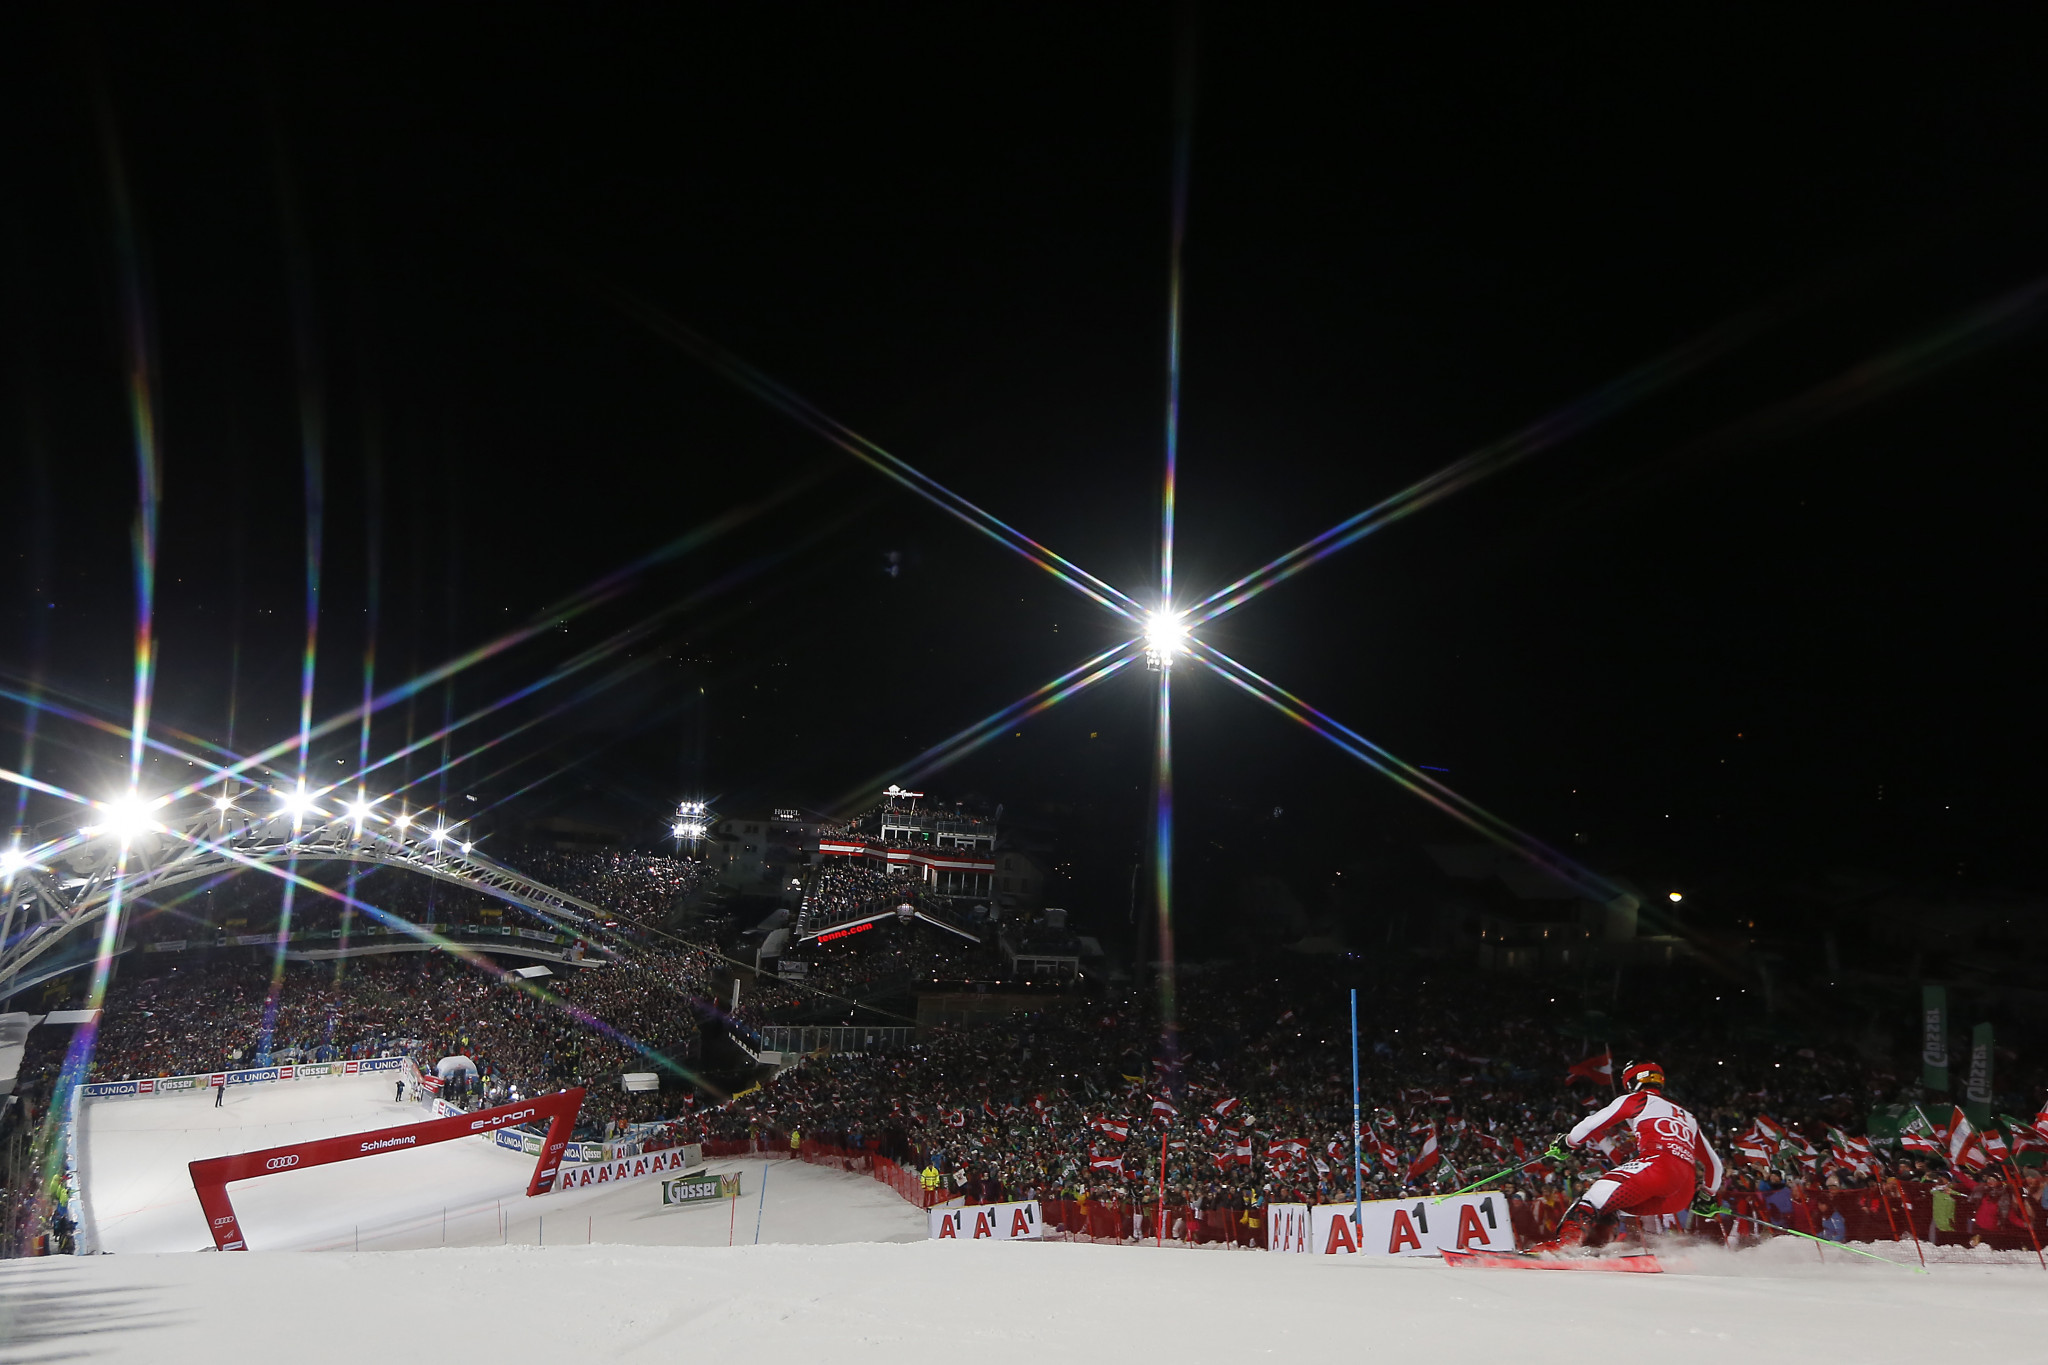 The Austrian star was quickest in both runs to secure his 68th World Cup victory ©Getty Images